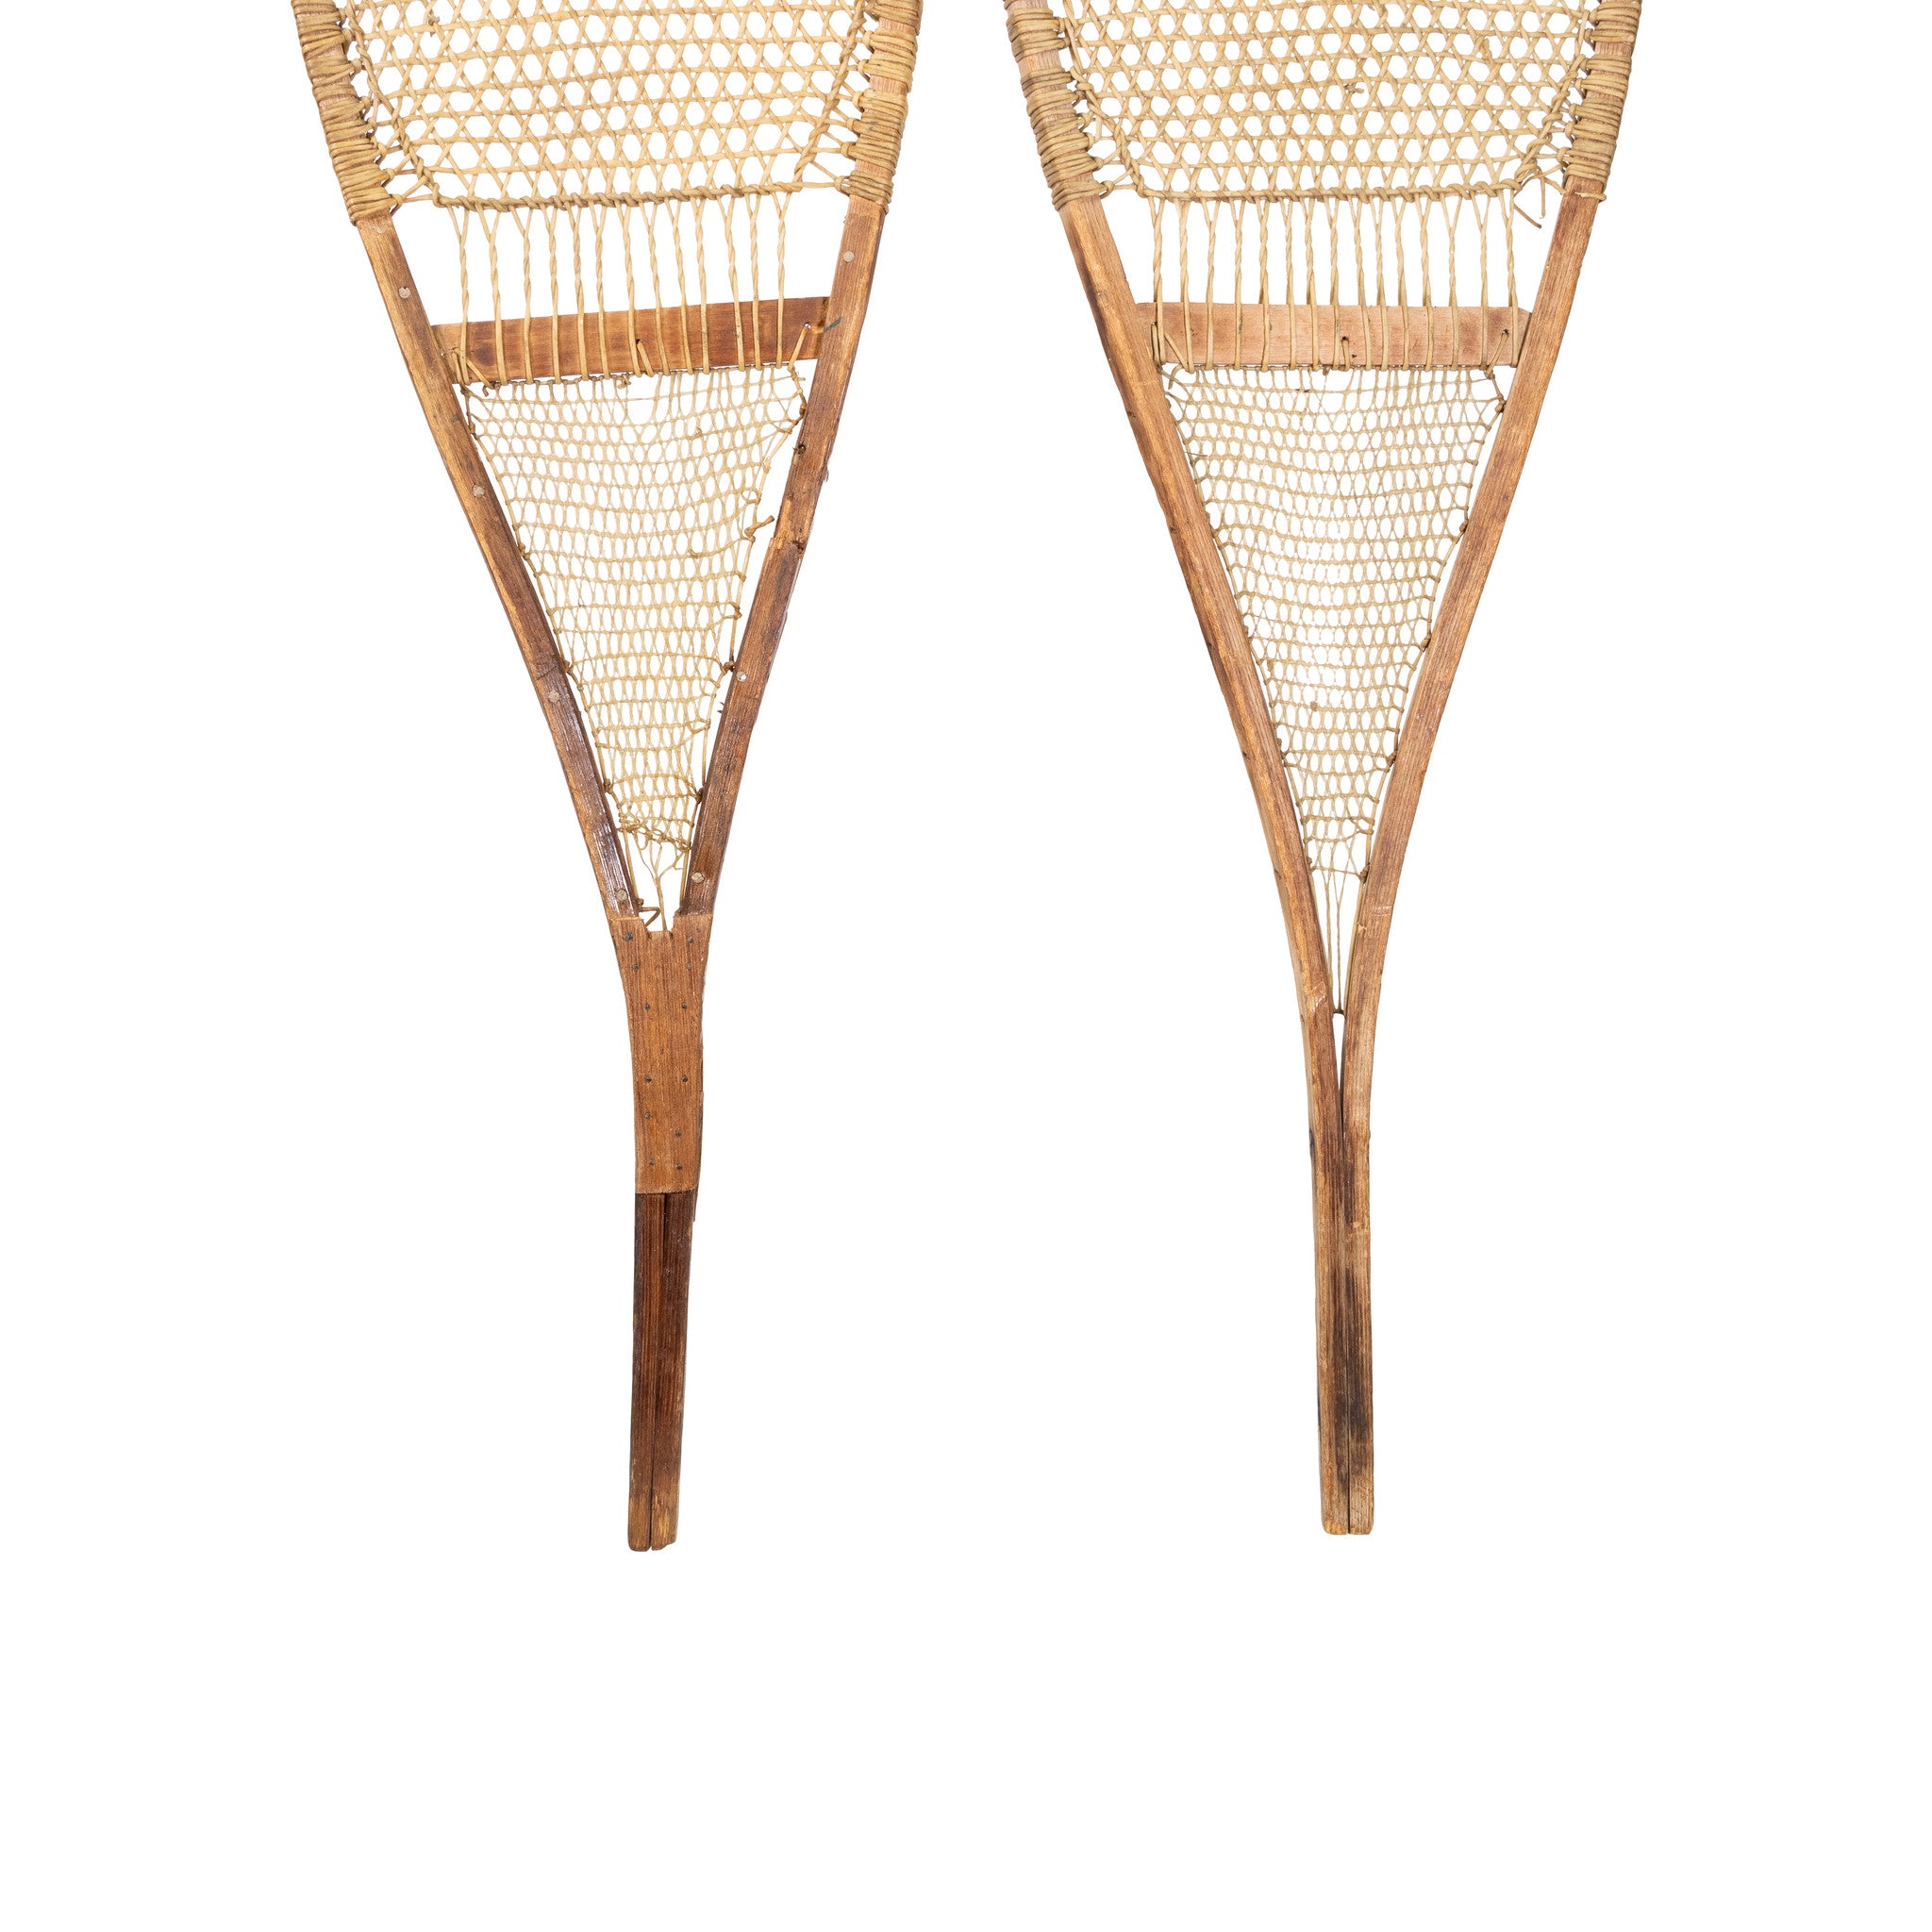 Northeast Native American Snowshoes